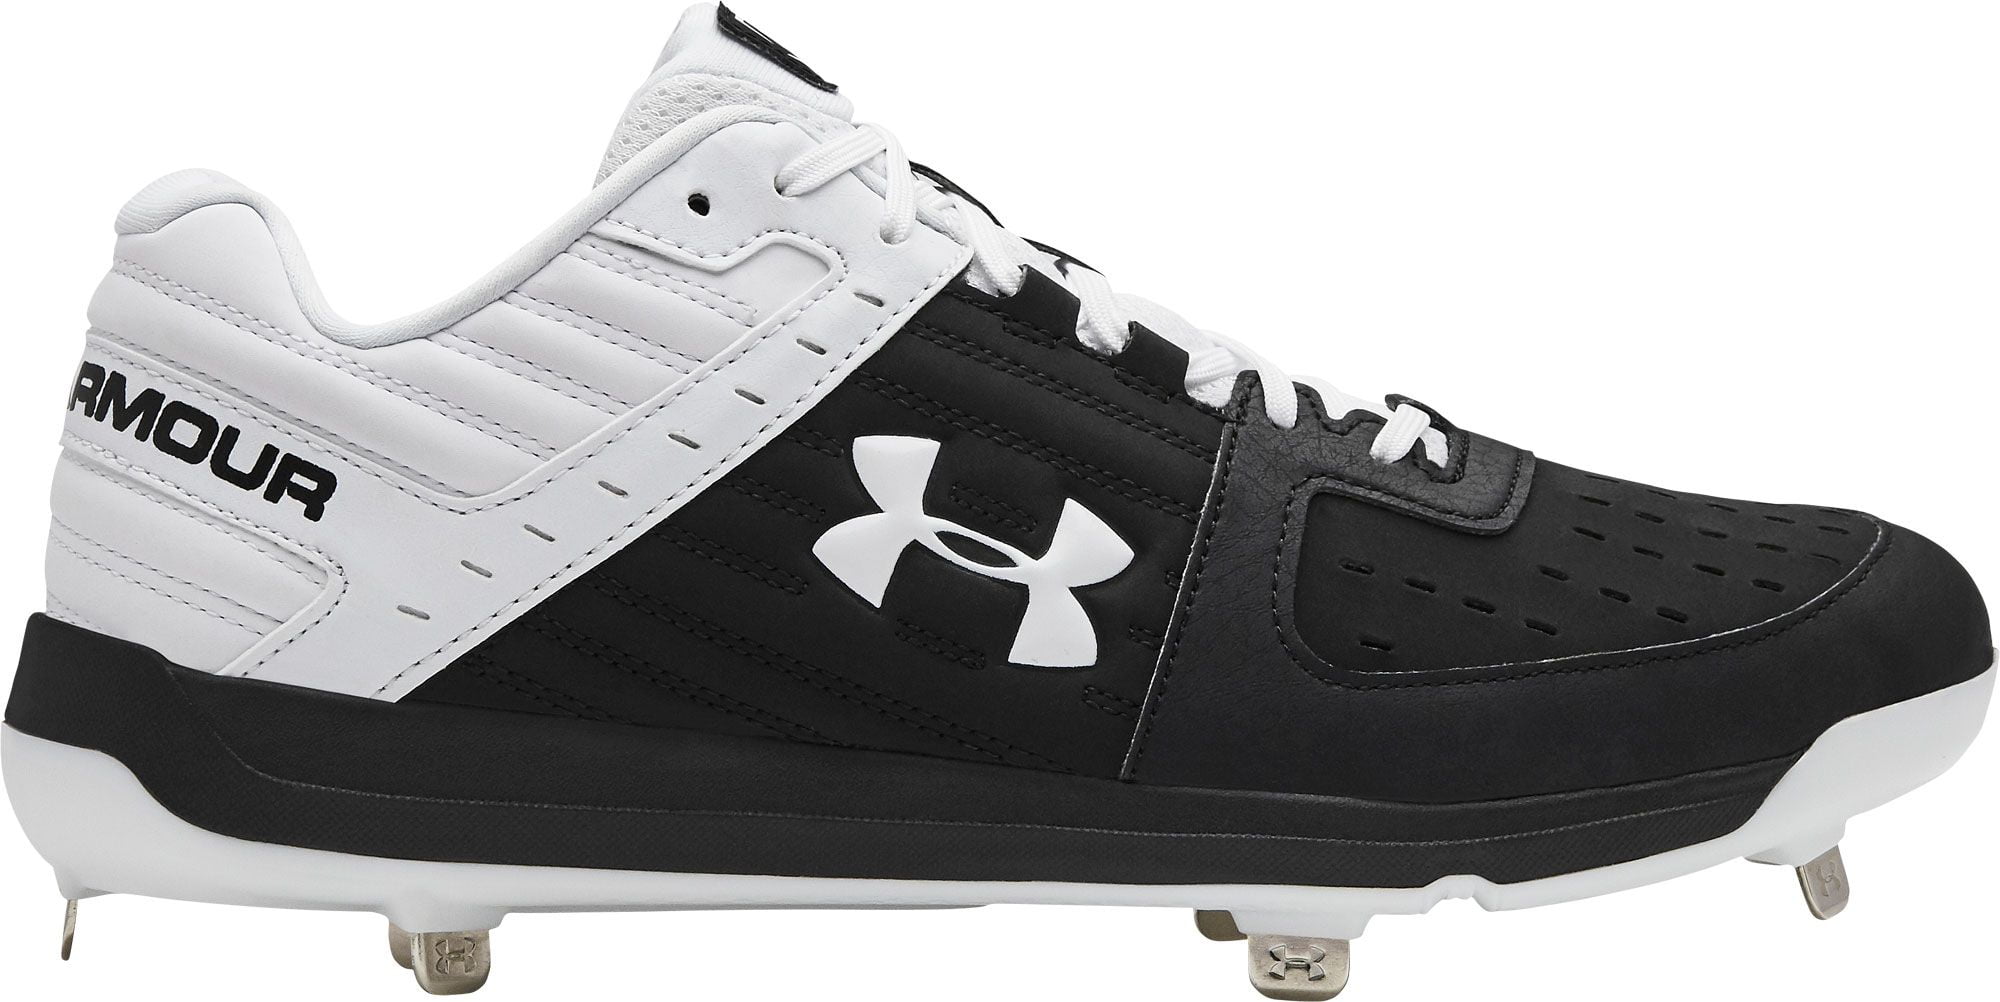 Under Armour Mens Ignite Low St Baseball Shoe